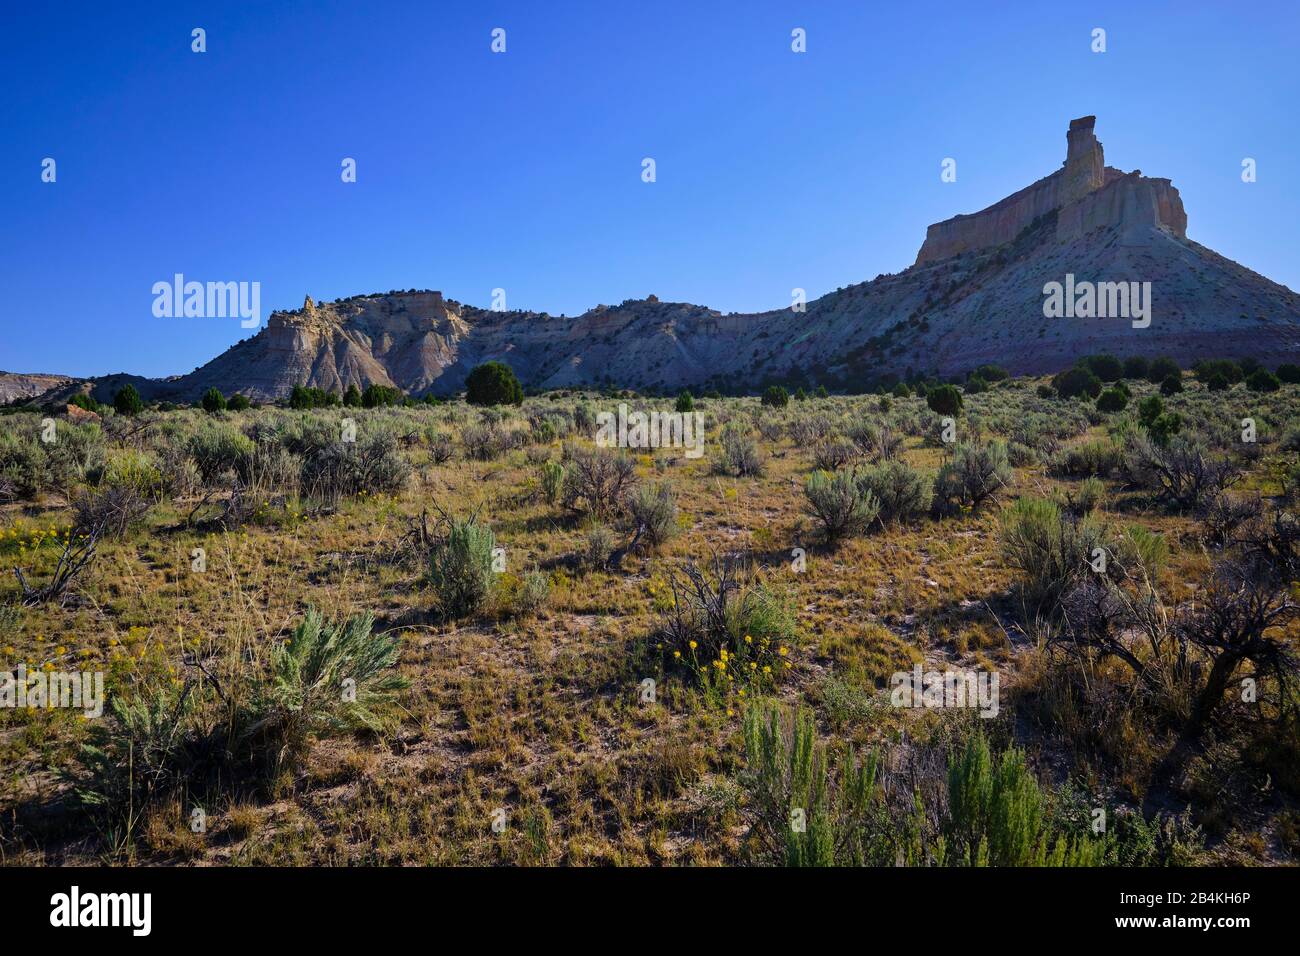 USA, United States of America, Red Canyon, Dixie National Forest, Bryce Canyon, Utah, Southwest USA, Utah State Route 12, Scenic Byway,Escalante, Capitol Reef National Park, Stock Photo